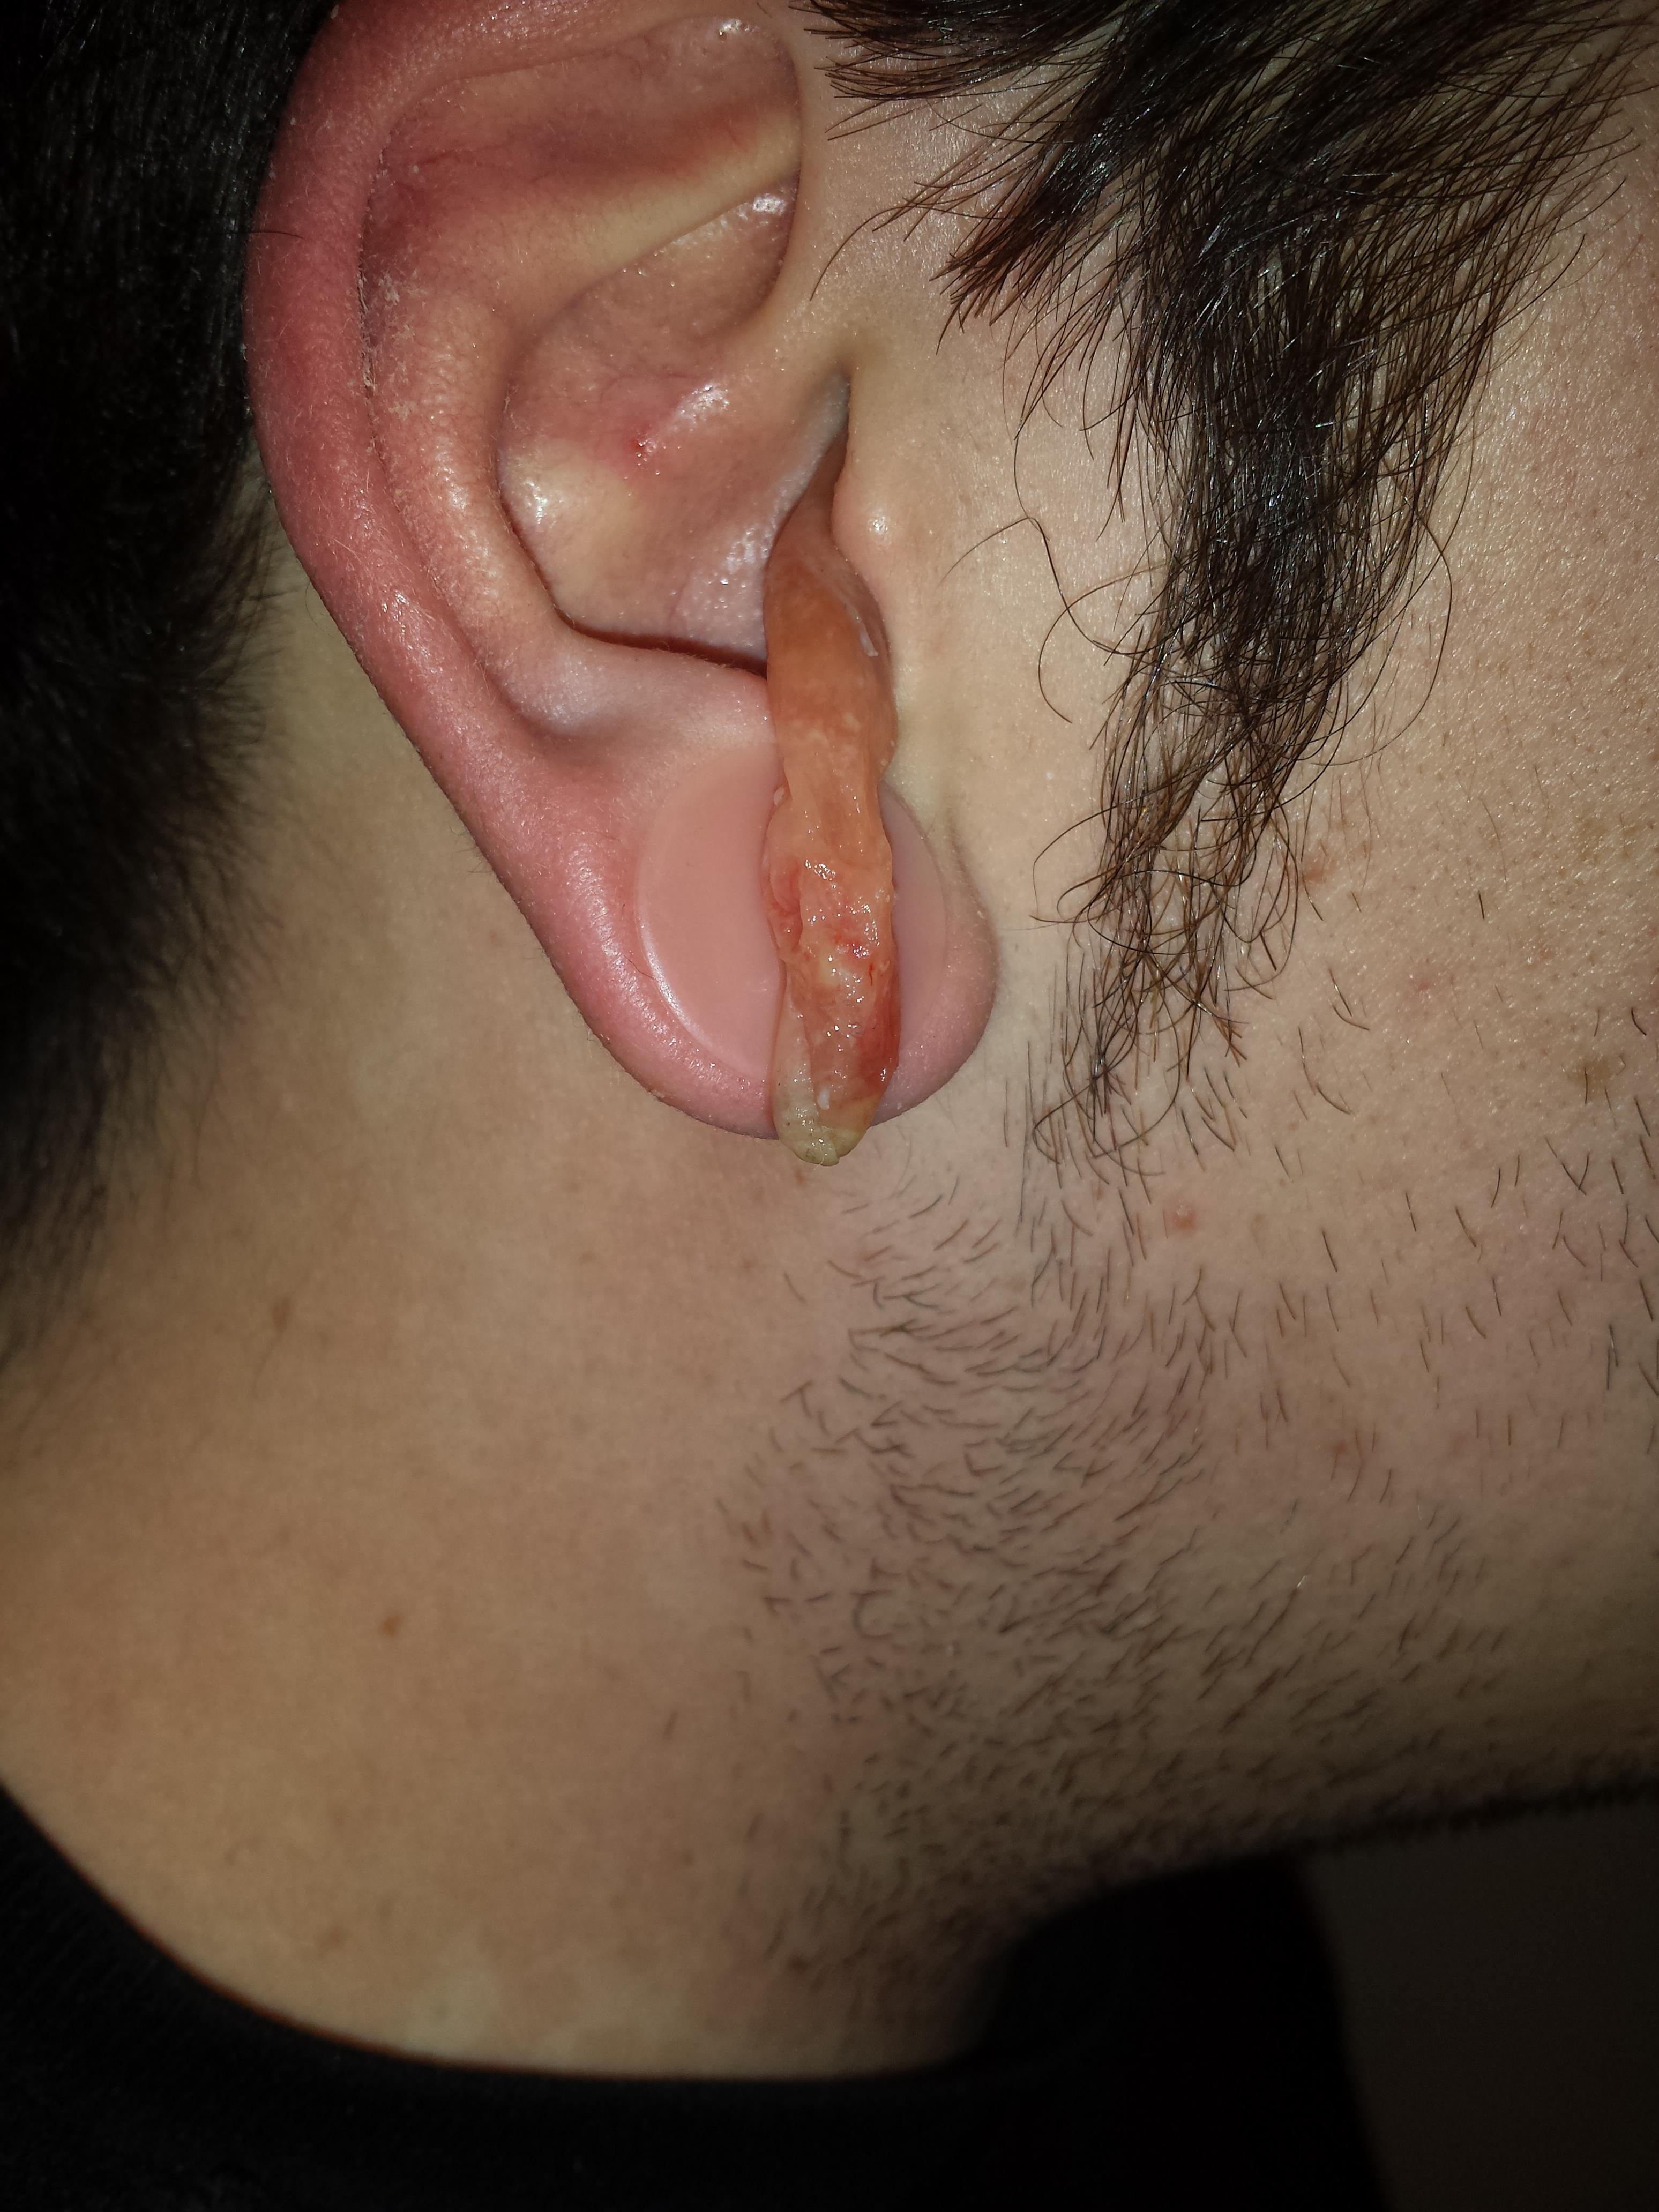 Ear Infection 10